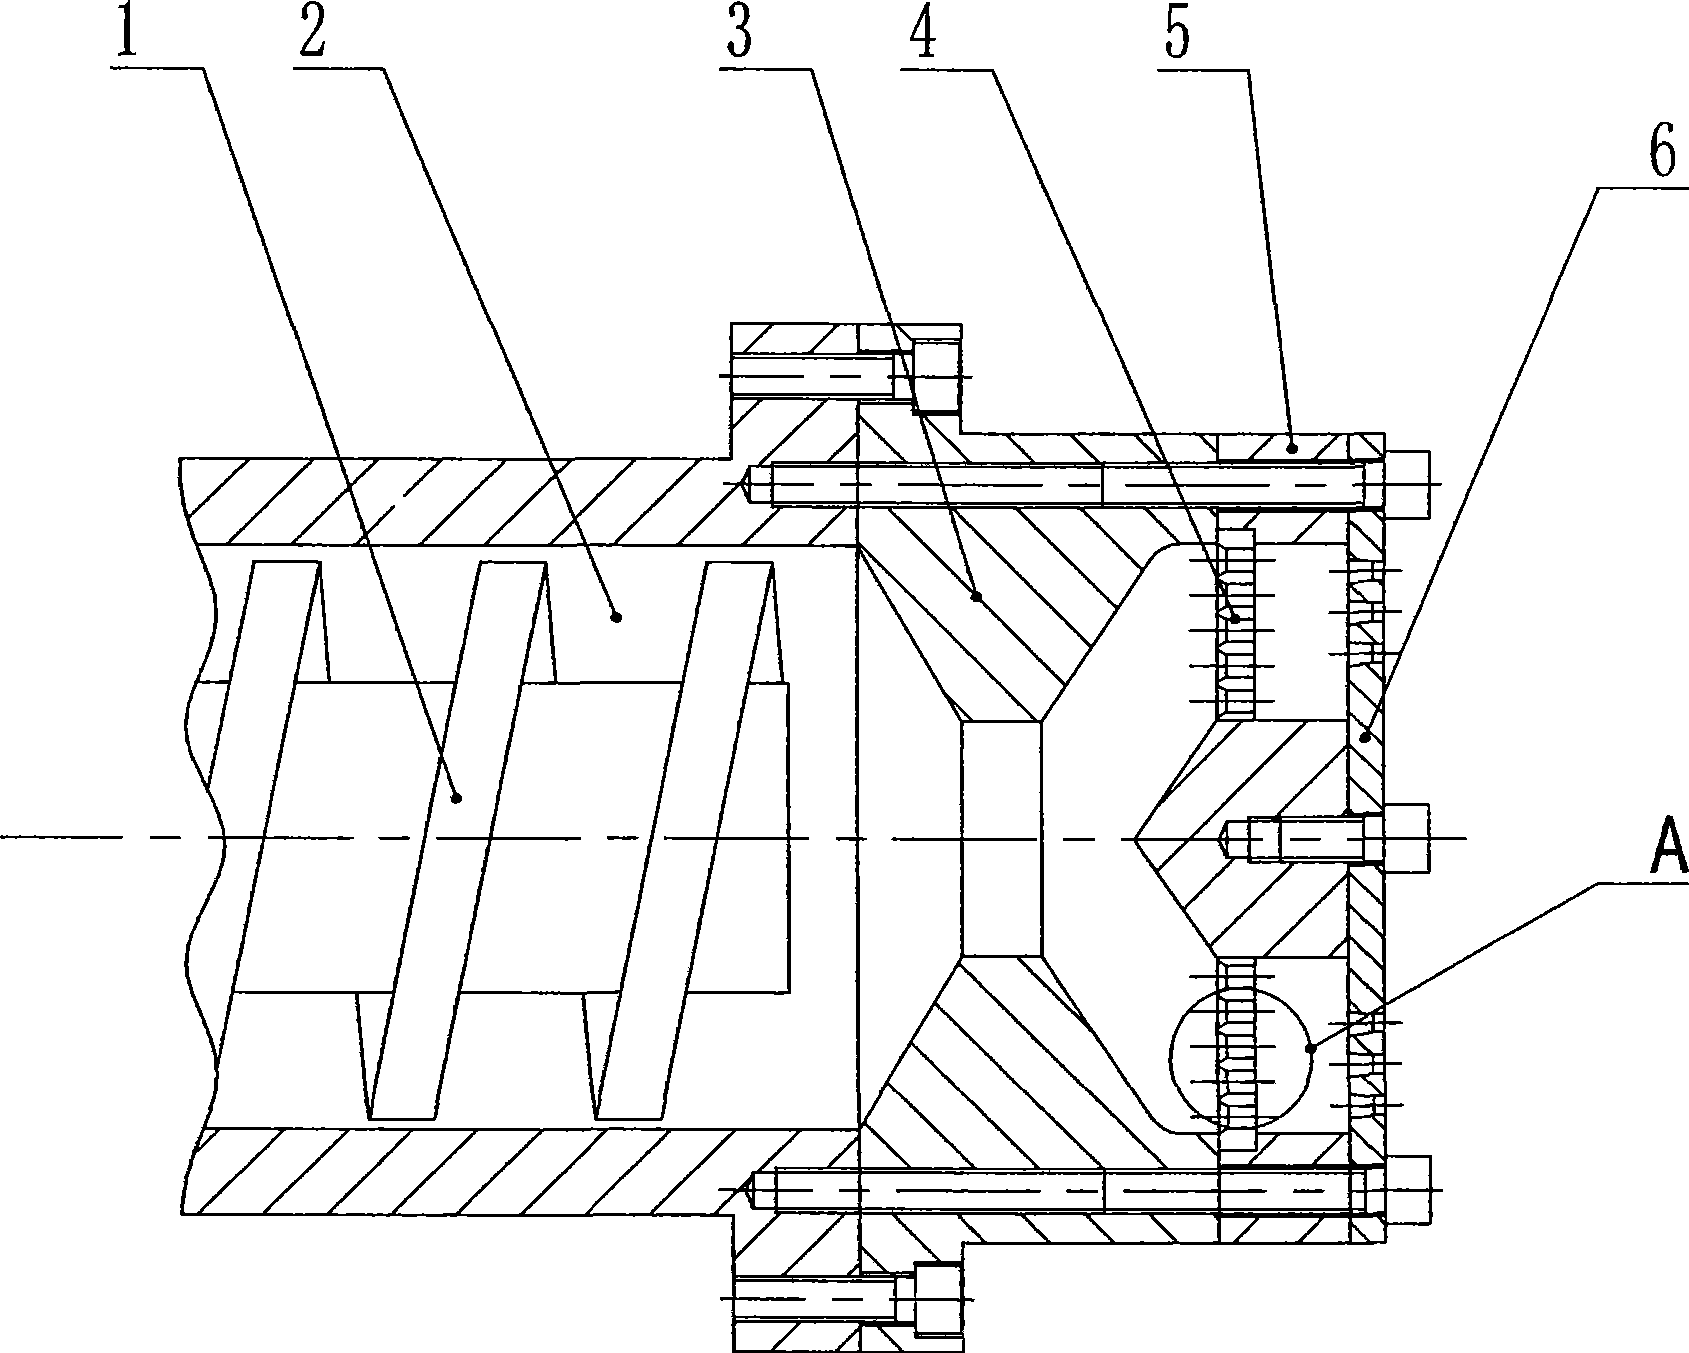 Extrusion pressing puffing apparatus capable of removing fibre in materials